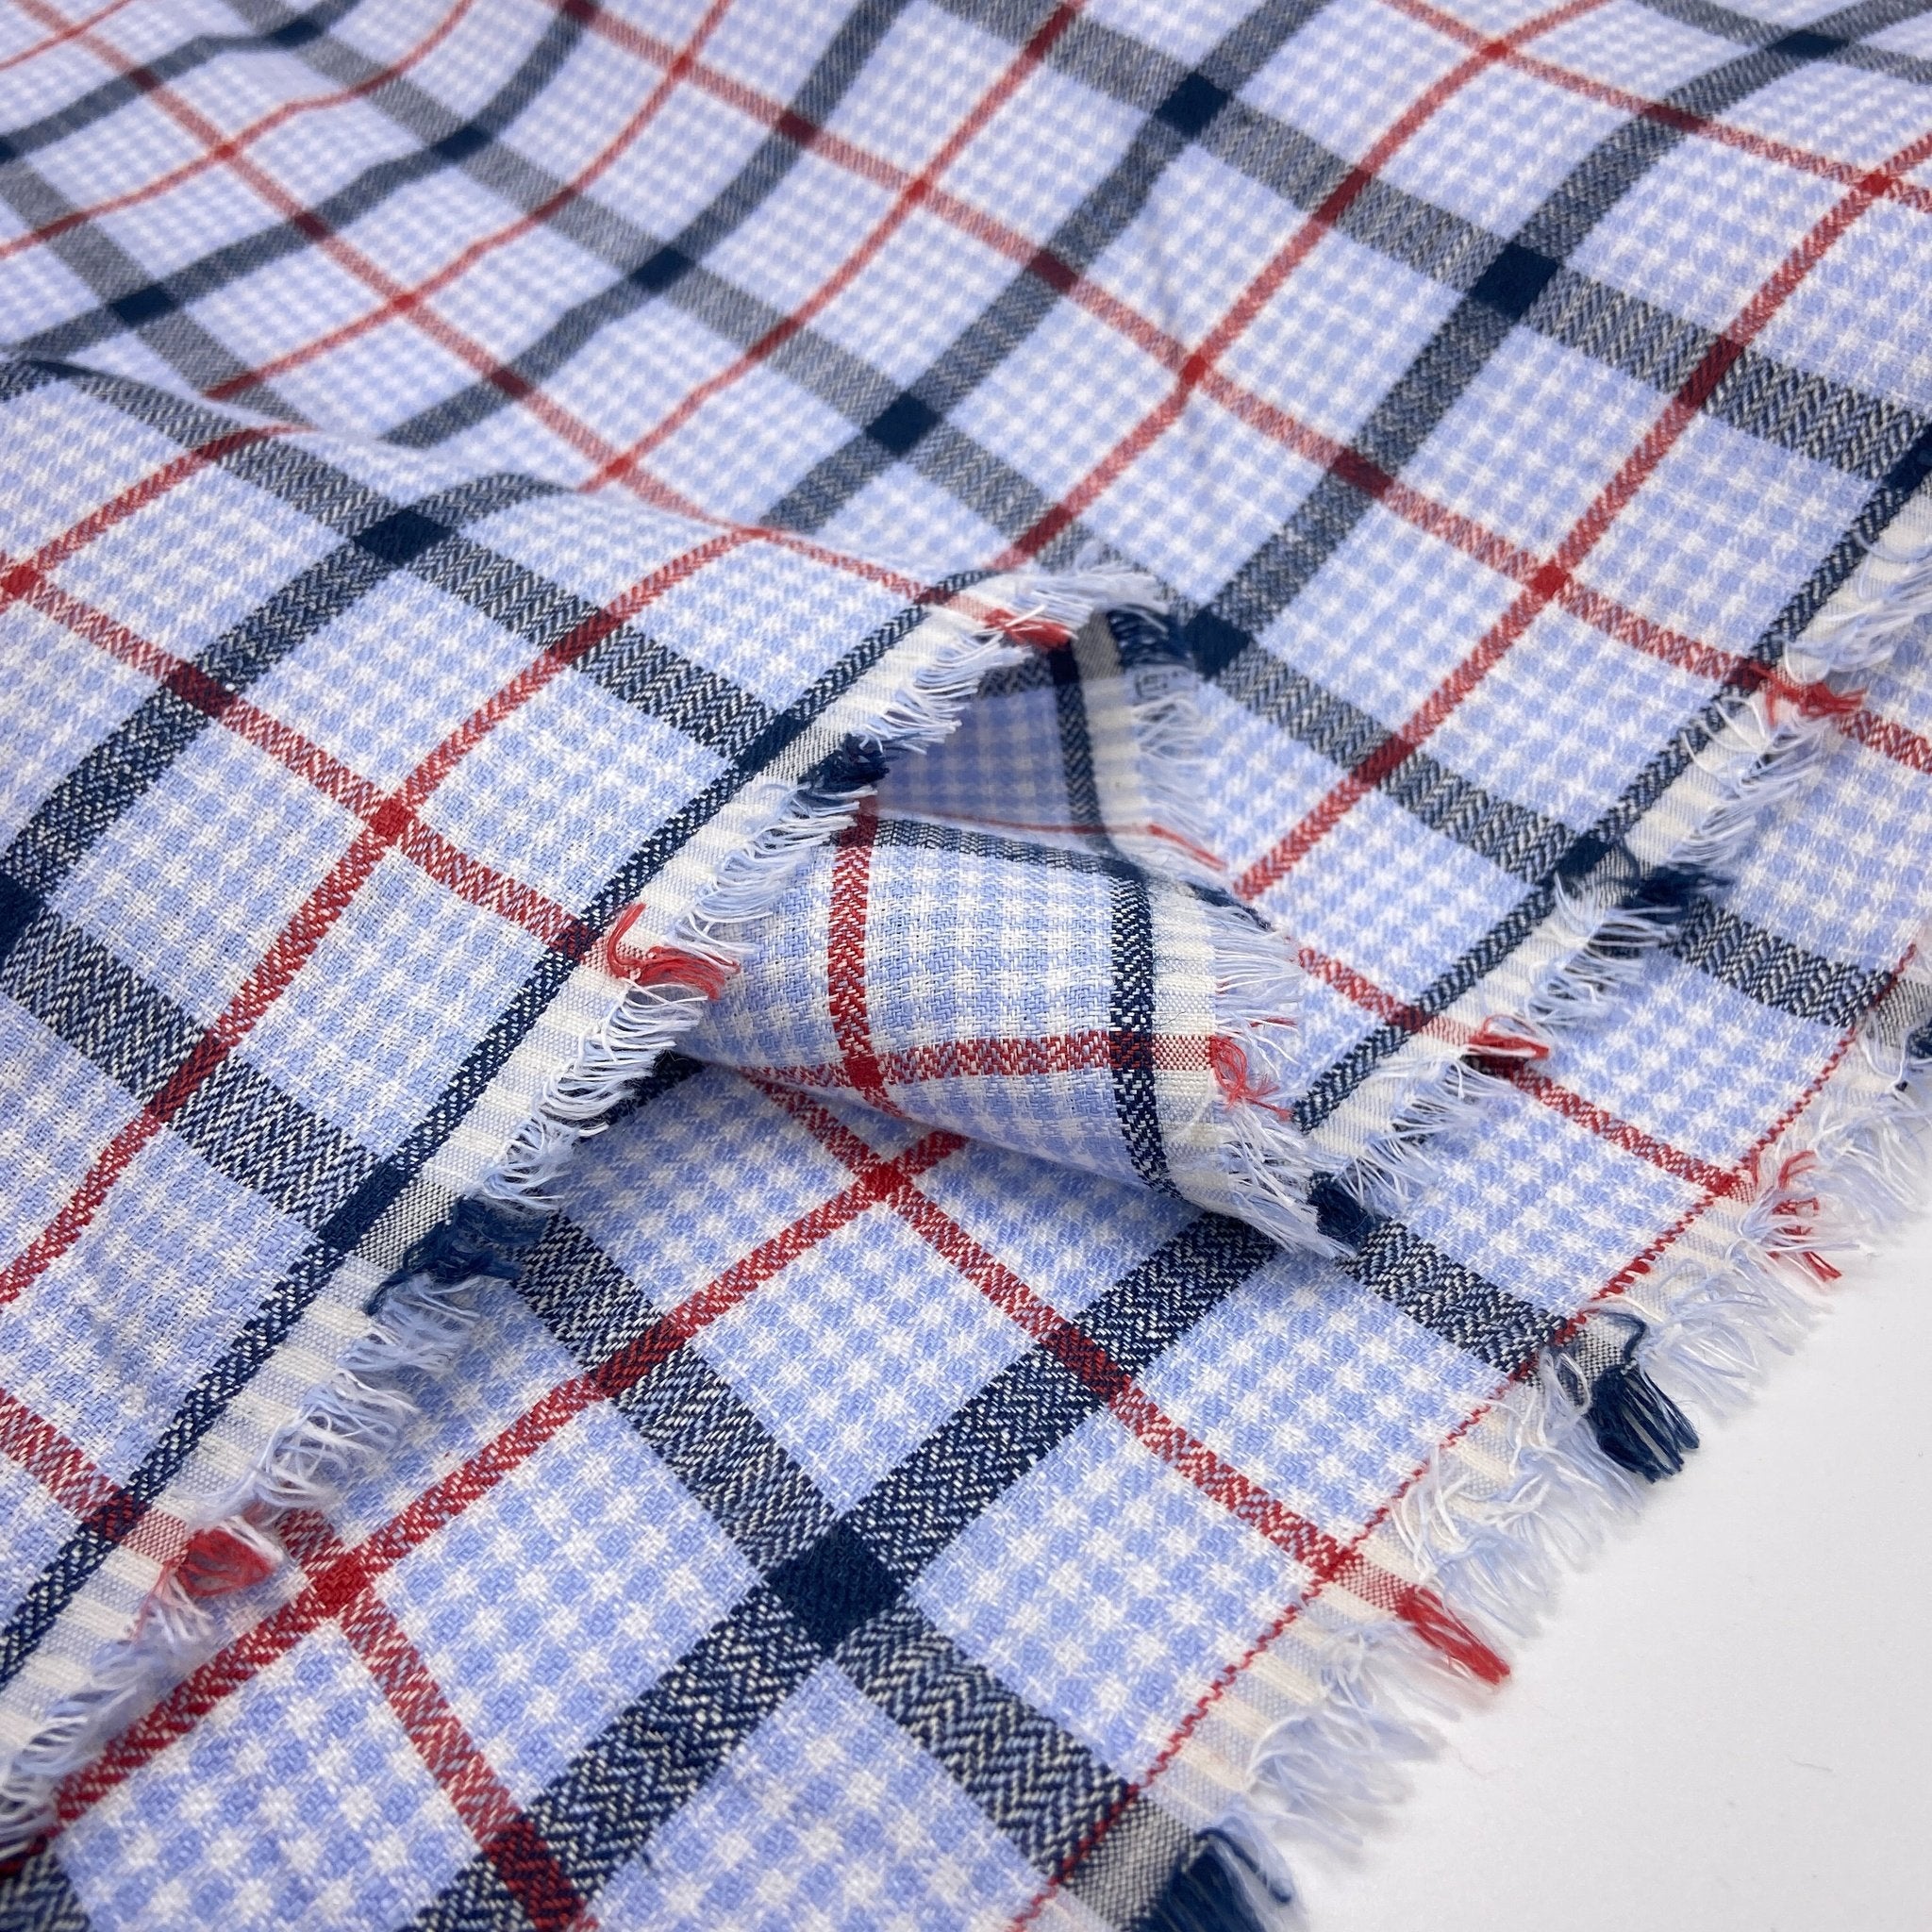 Linen Plaid - Blue and Red